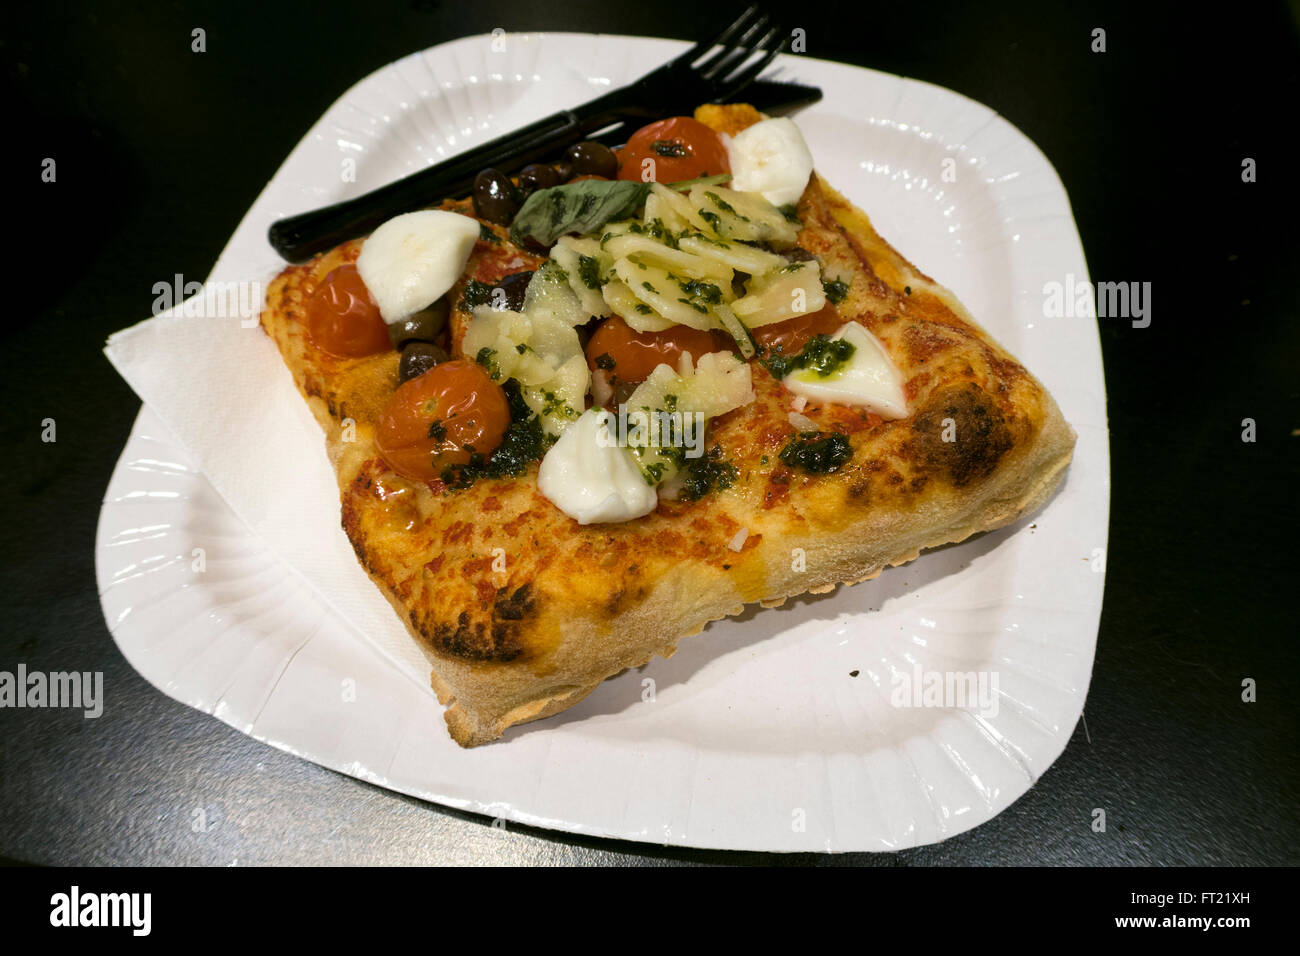 Greek style square pizza with vegetables and cheese Stock Photo